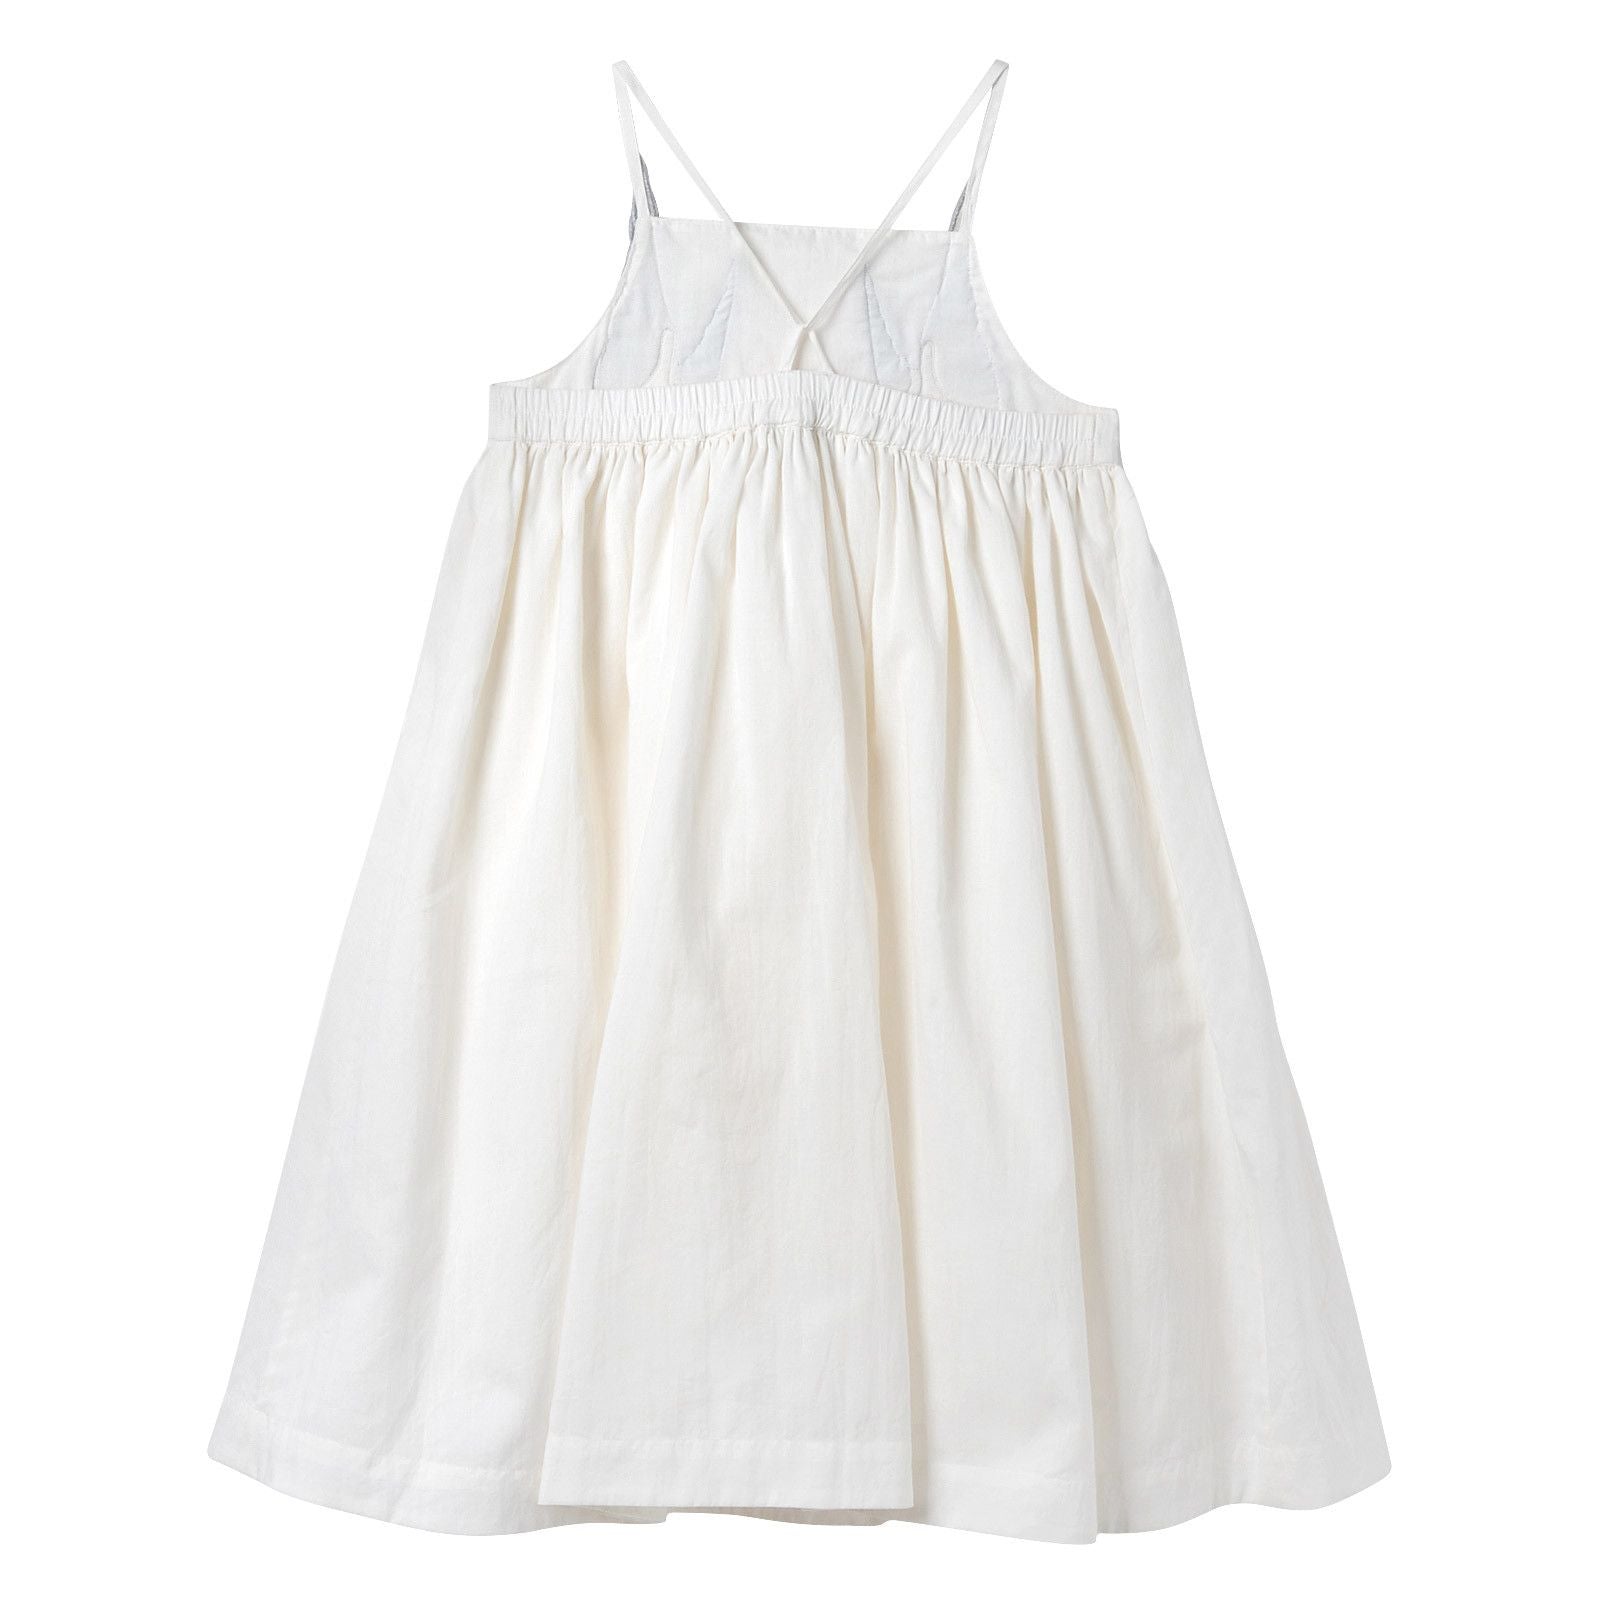 Girls White Cotton Woven Dress With Bird Embroidered Trims - CÉMAROSE | Children's Fashion Store - 2